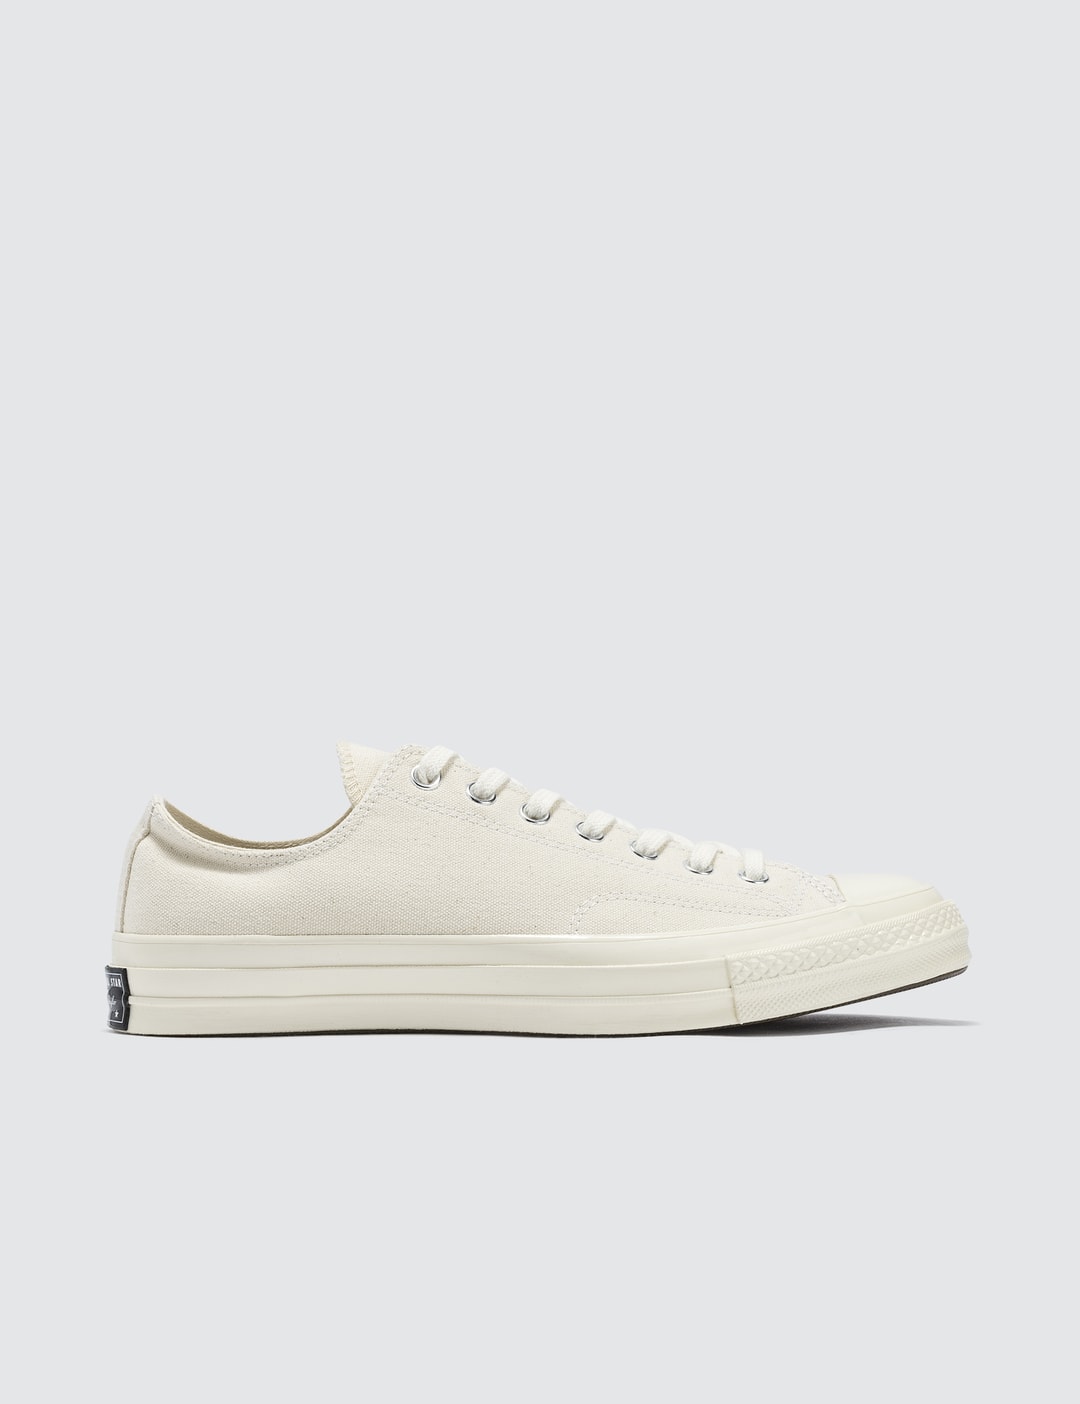 Converse - Chuck Taylor All Star 70 | HBX - Globally Curated Fashion ...